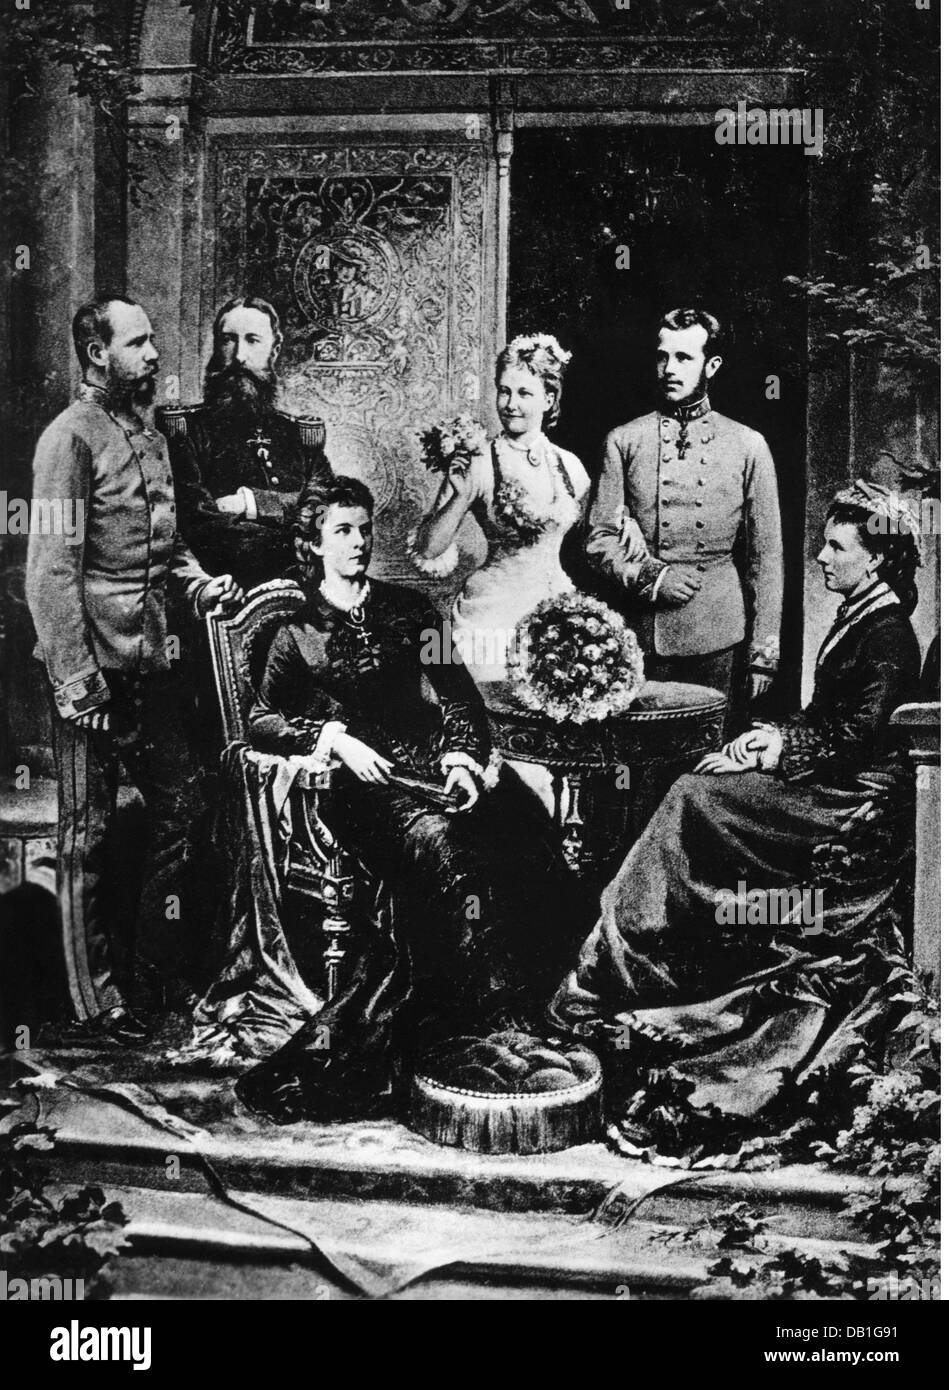 Rudolf, 21.8.1858 - 30.1.1889, Crown Prince of Austria-Hungary, with wife Stephanie, parents Emperor Franz Joseph I and Empress Elisabeth, parents-in-law King Leopold II of Belgium and Queen Marie Henriette, 1881, composite photograph, Stock Photo